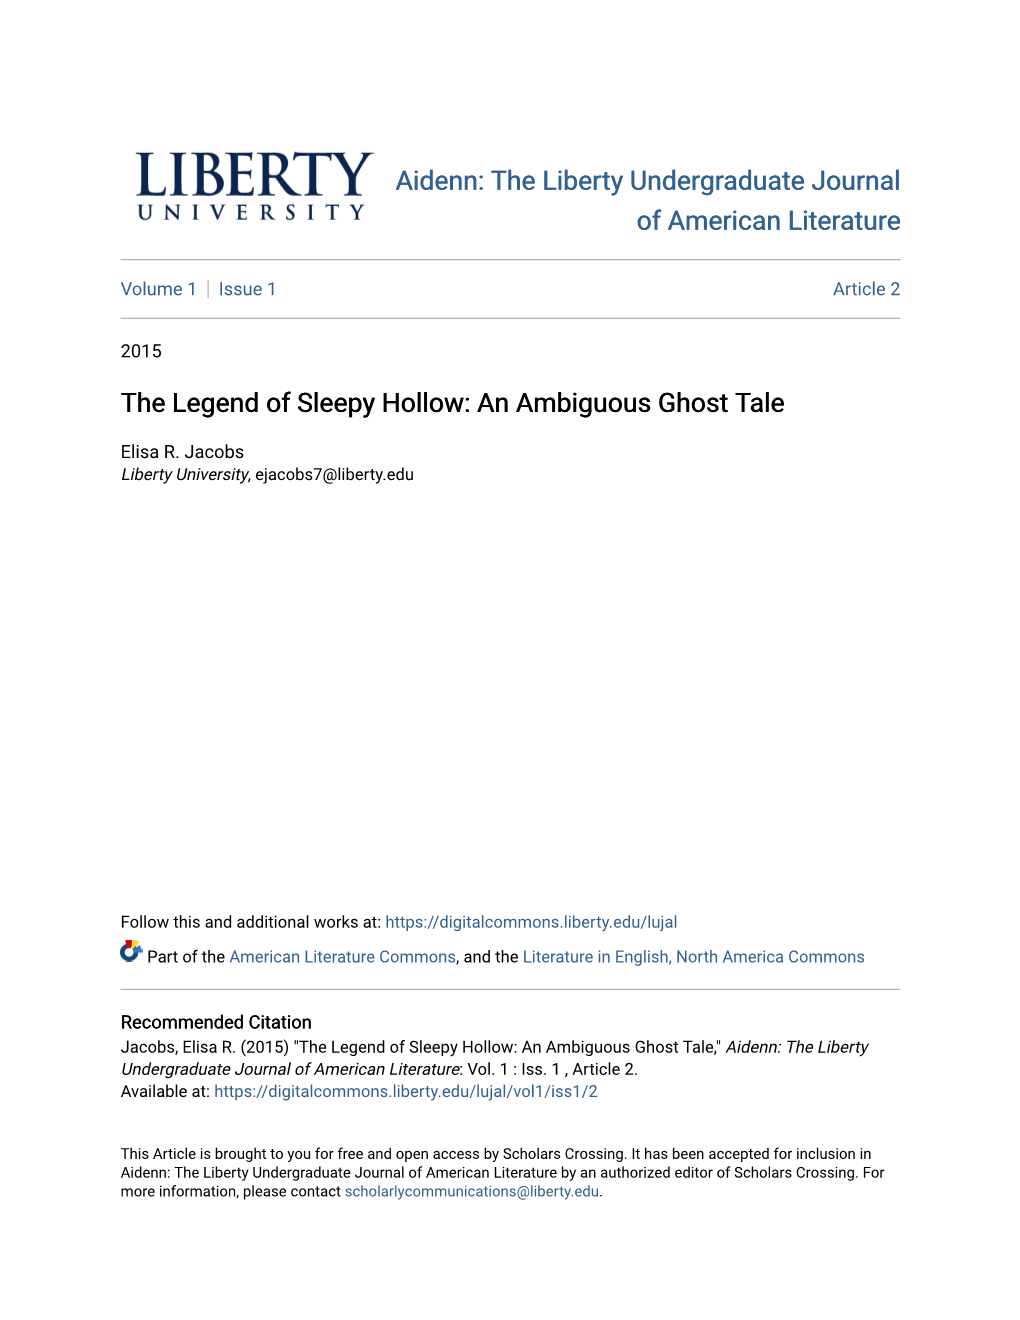 The Legend of Sleepy Hollow: an Ambiguous Ghost Tale